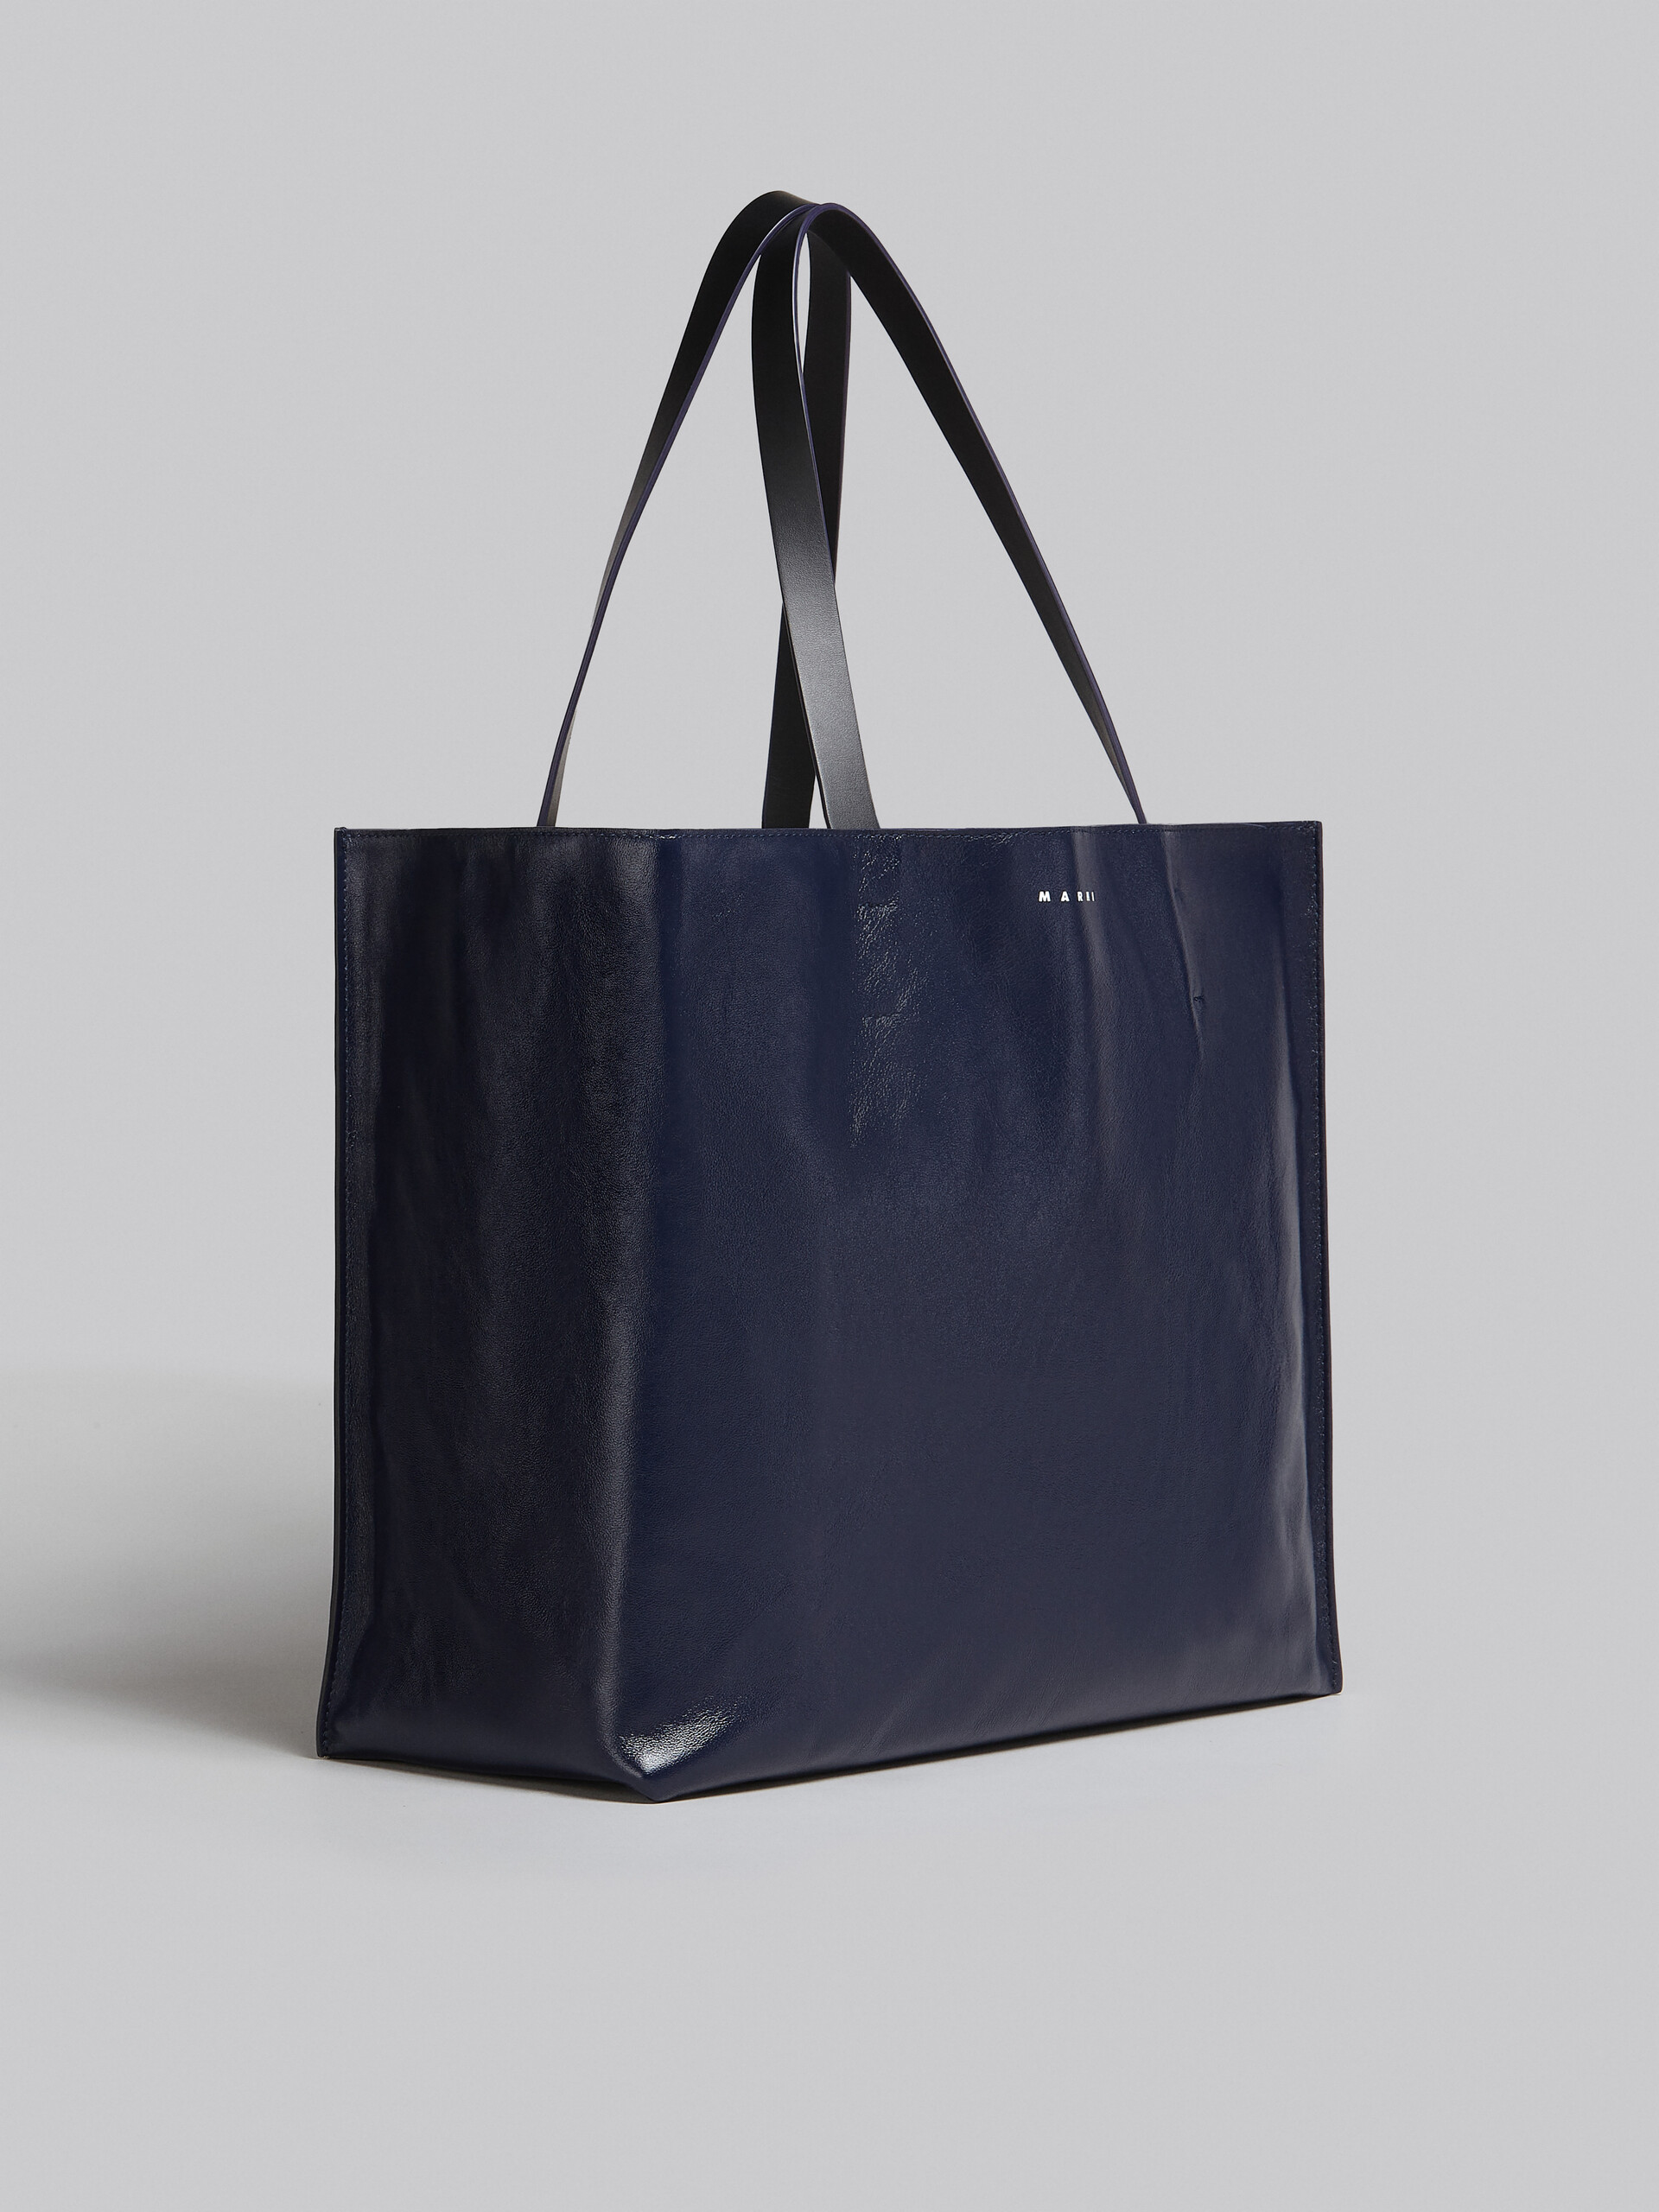 Museo Soft Bag in blue and black leather - Shopping Bags - Image 6